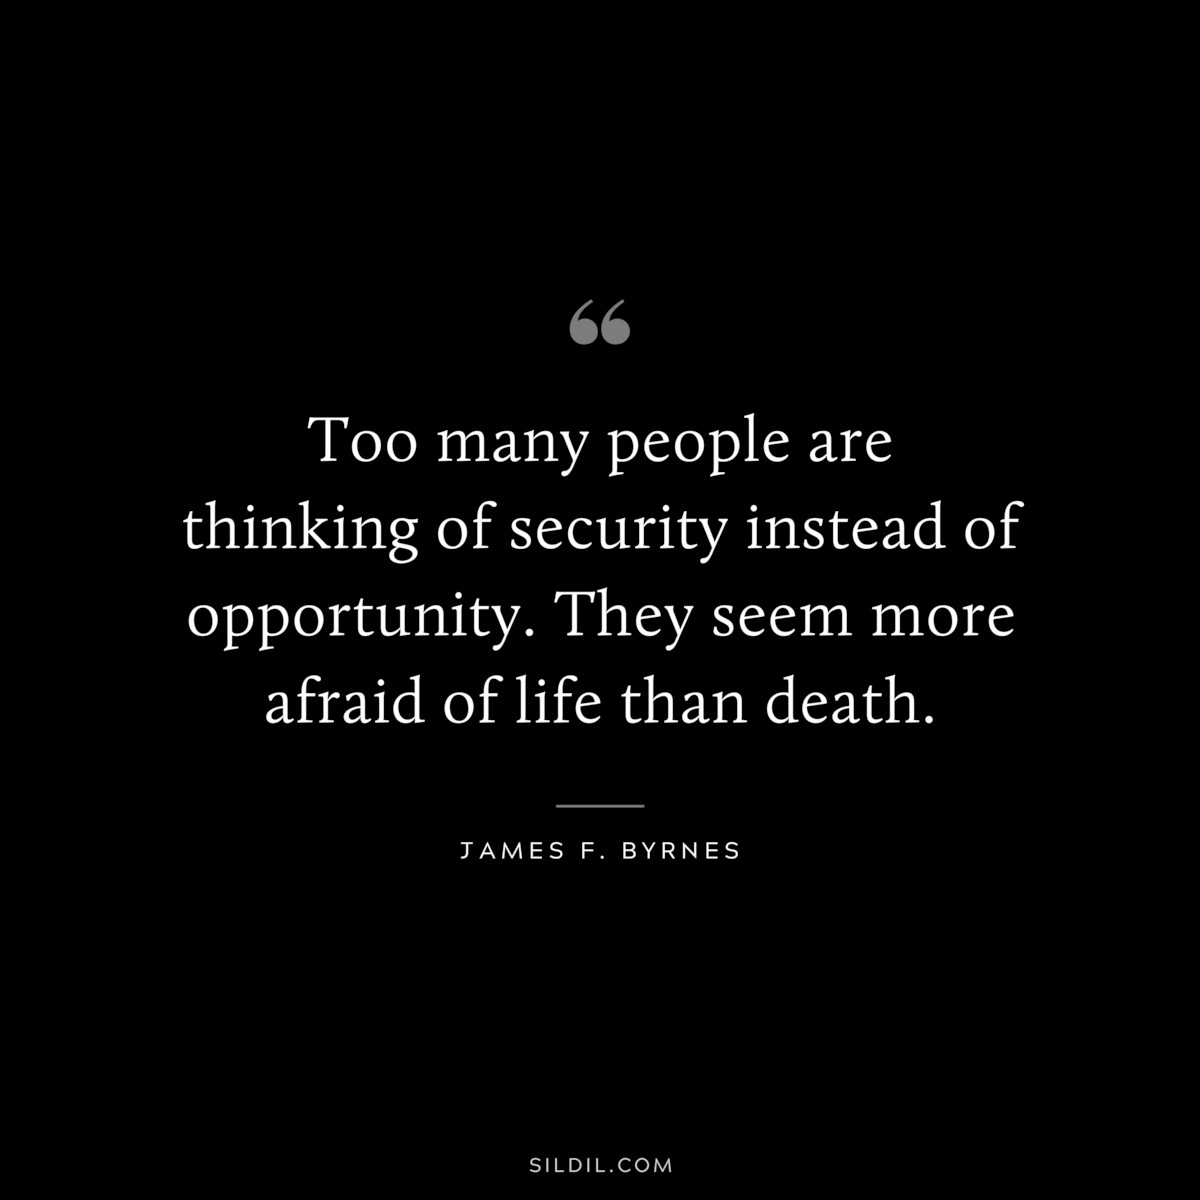 Too many people are thinking of security instead of opportunity. They seem more afraid of life than death. ― James F. Byrnes